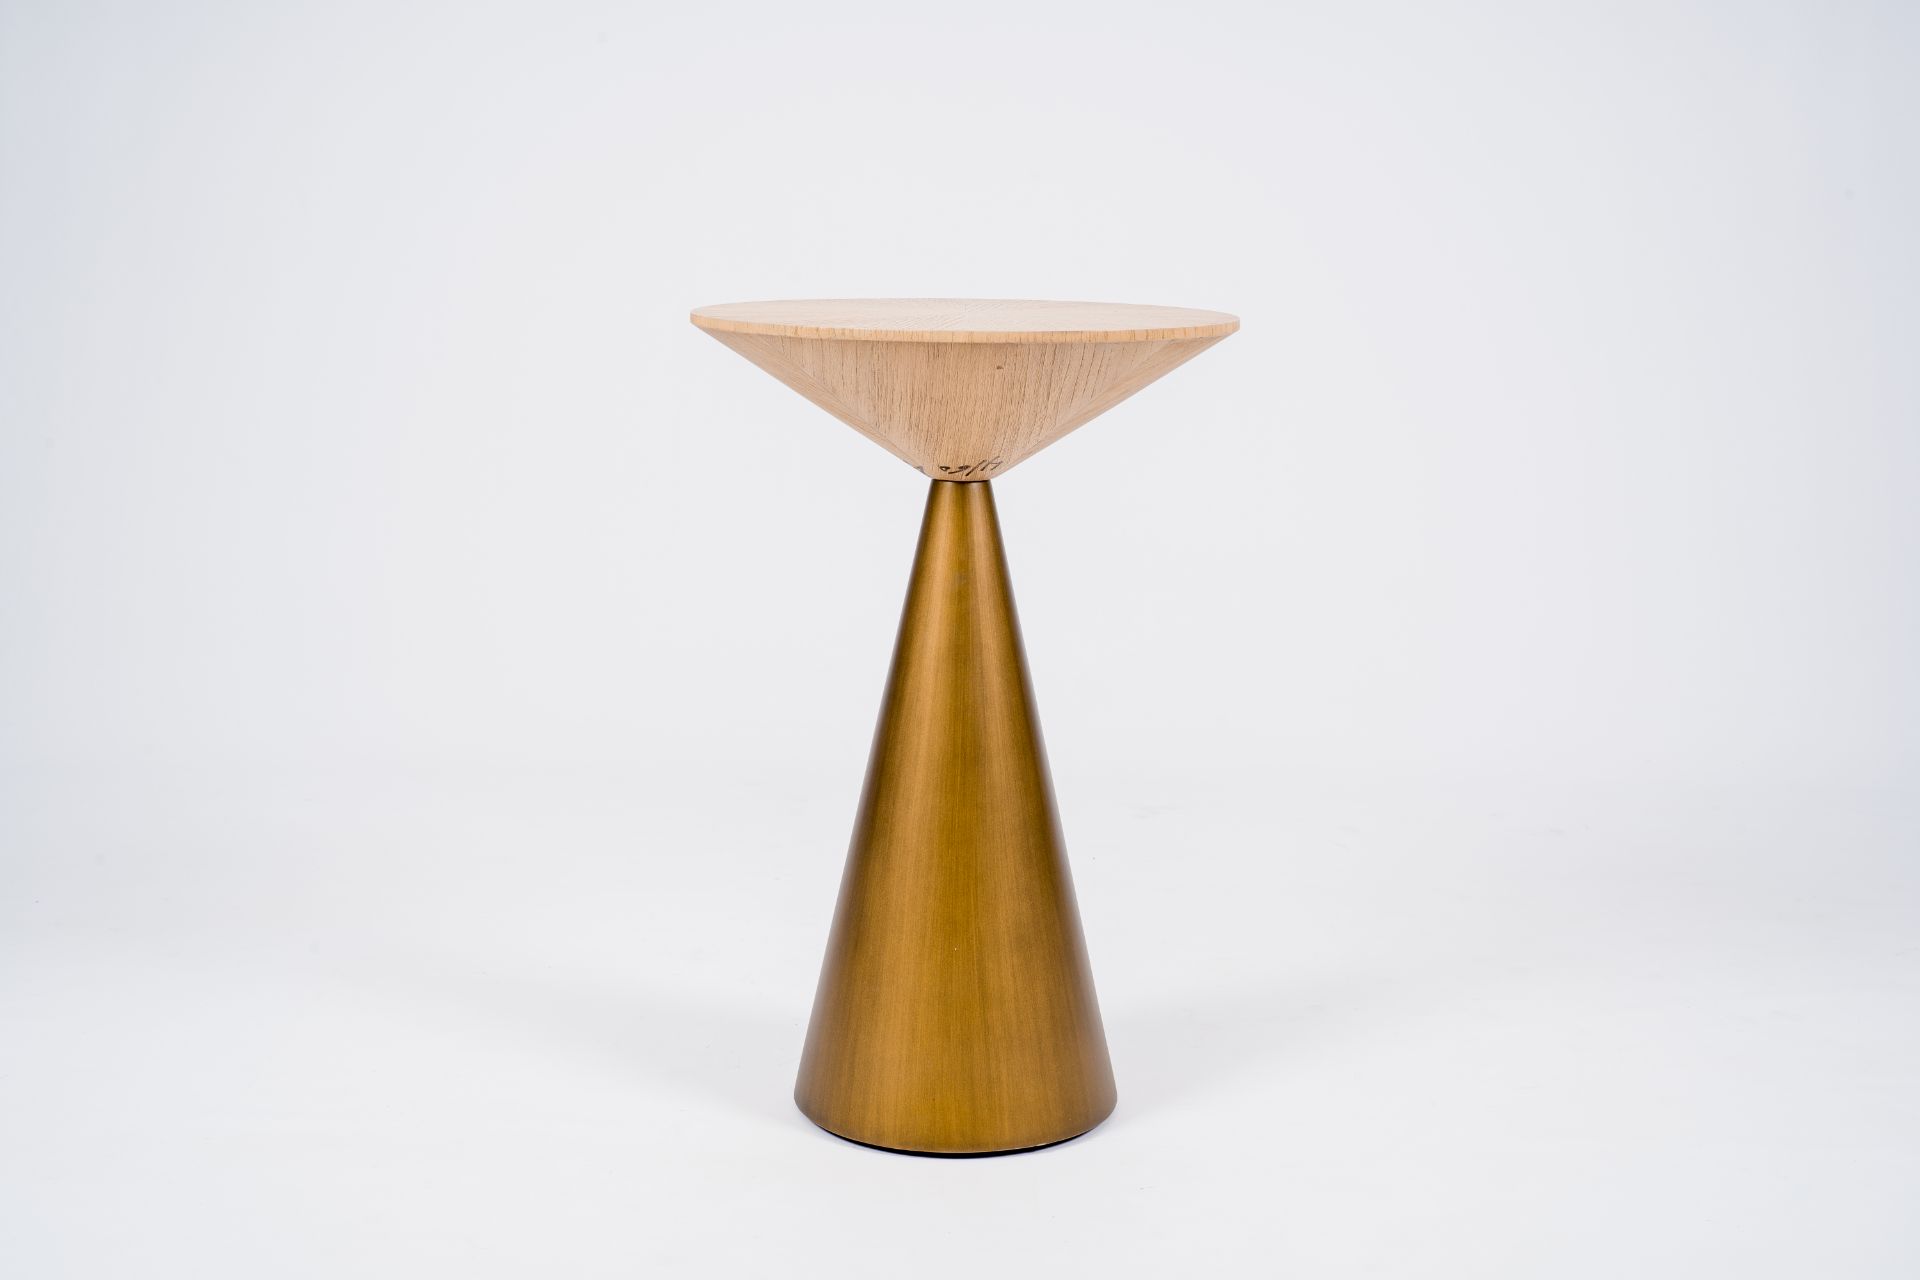 Olivier De Schrijver (1958): A partly gold-coloured solid wood Lily table, ed. 4/60, 21st C. - Image 3 of 9